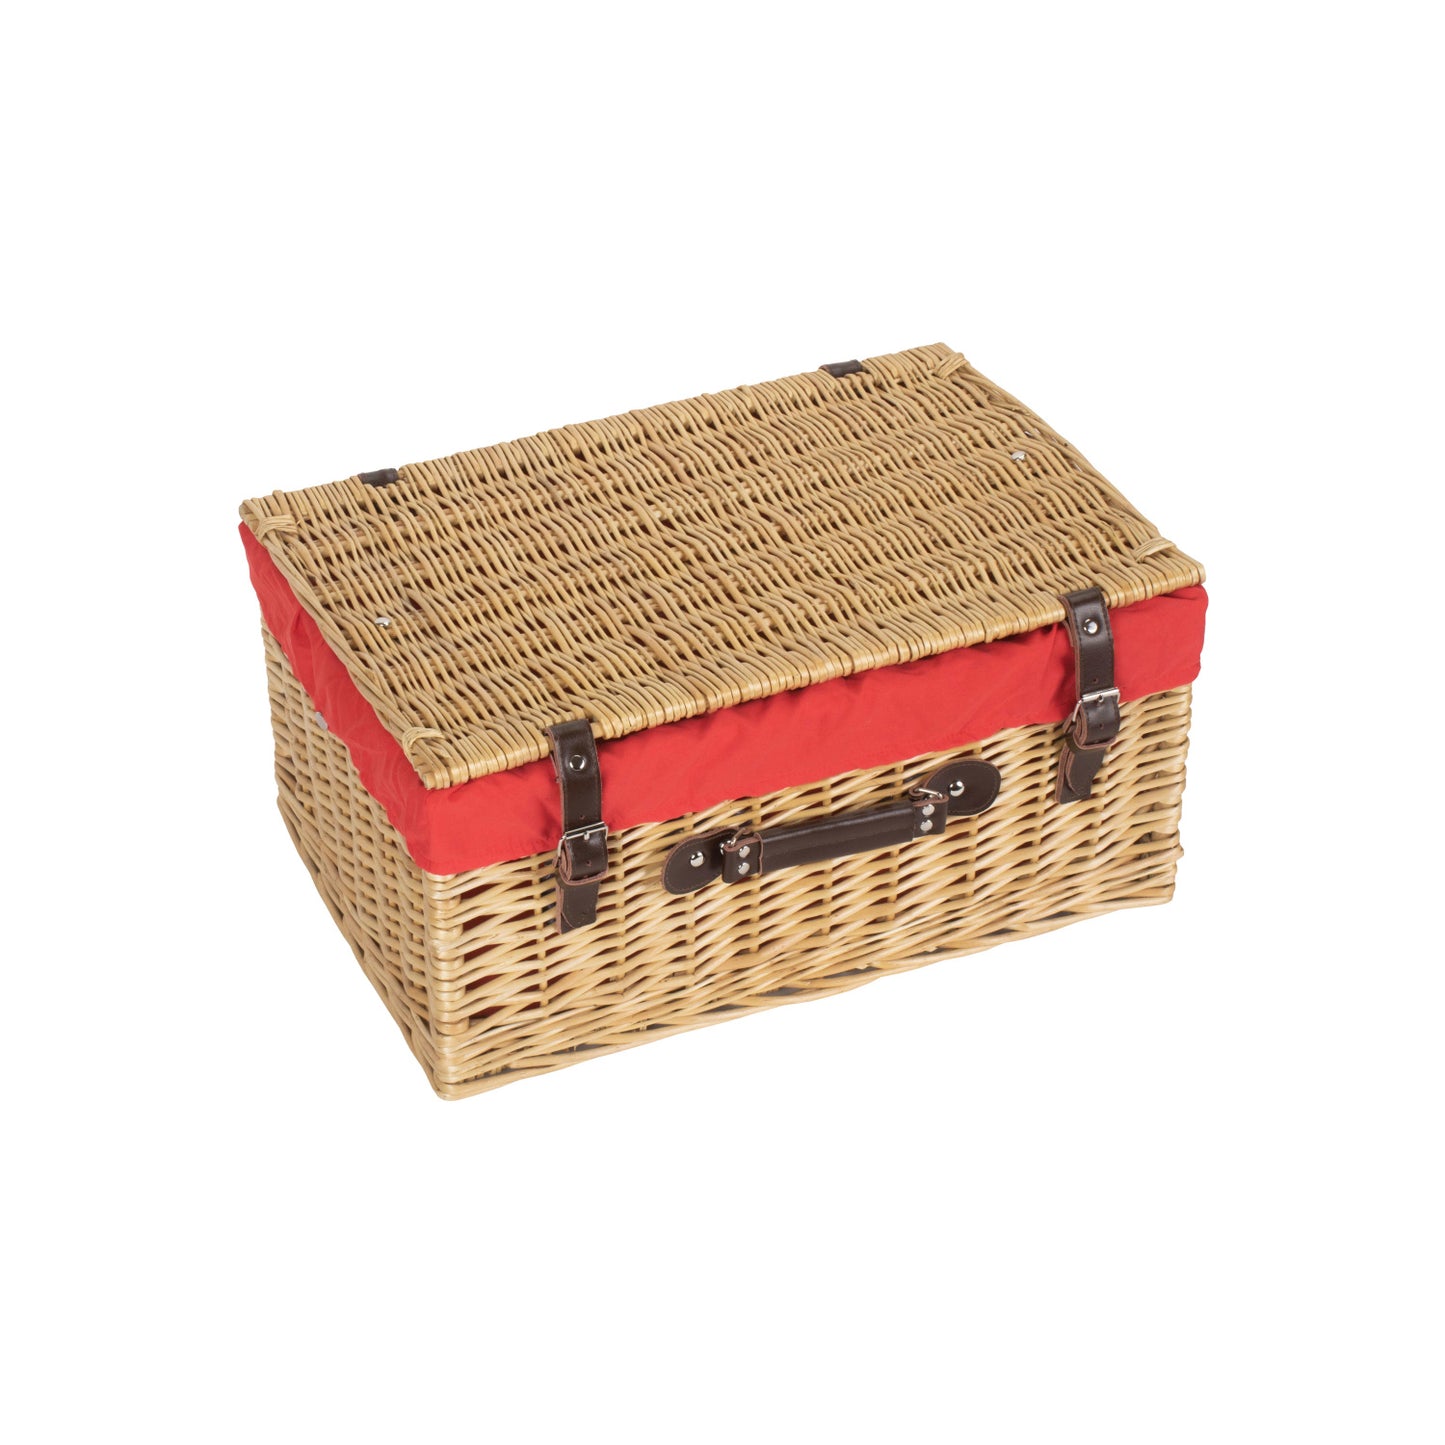 20 Inch Buff Hamper With Red Lining